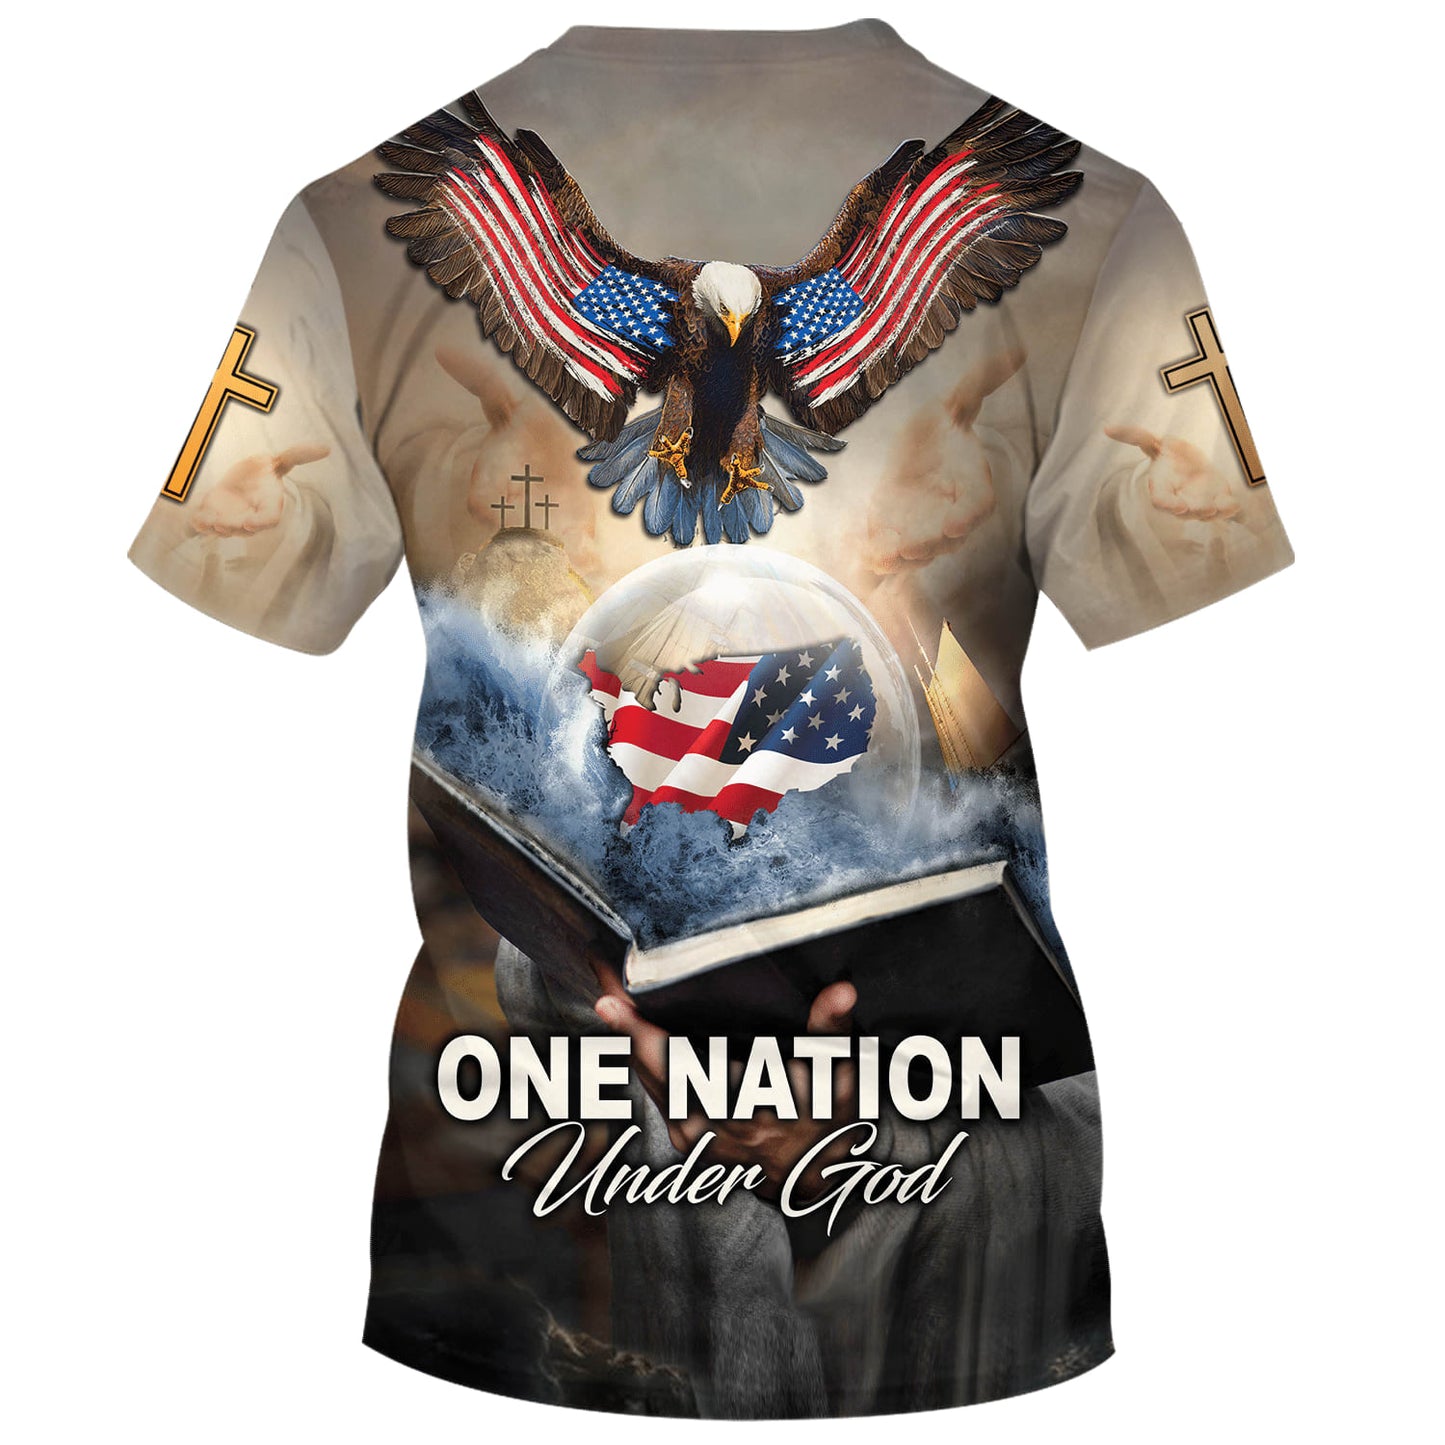 One Nation Under God 1 3d Shirts - Christian T Shirts For Men And Women